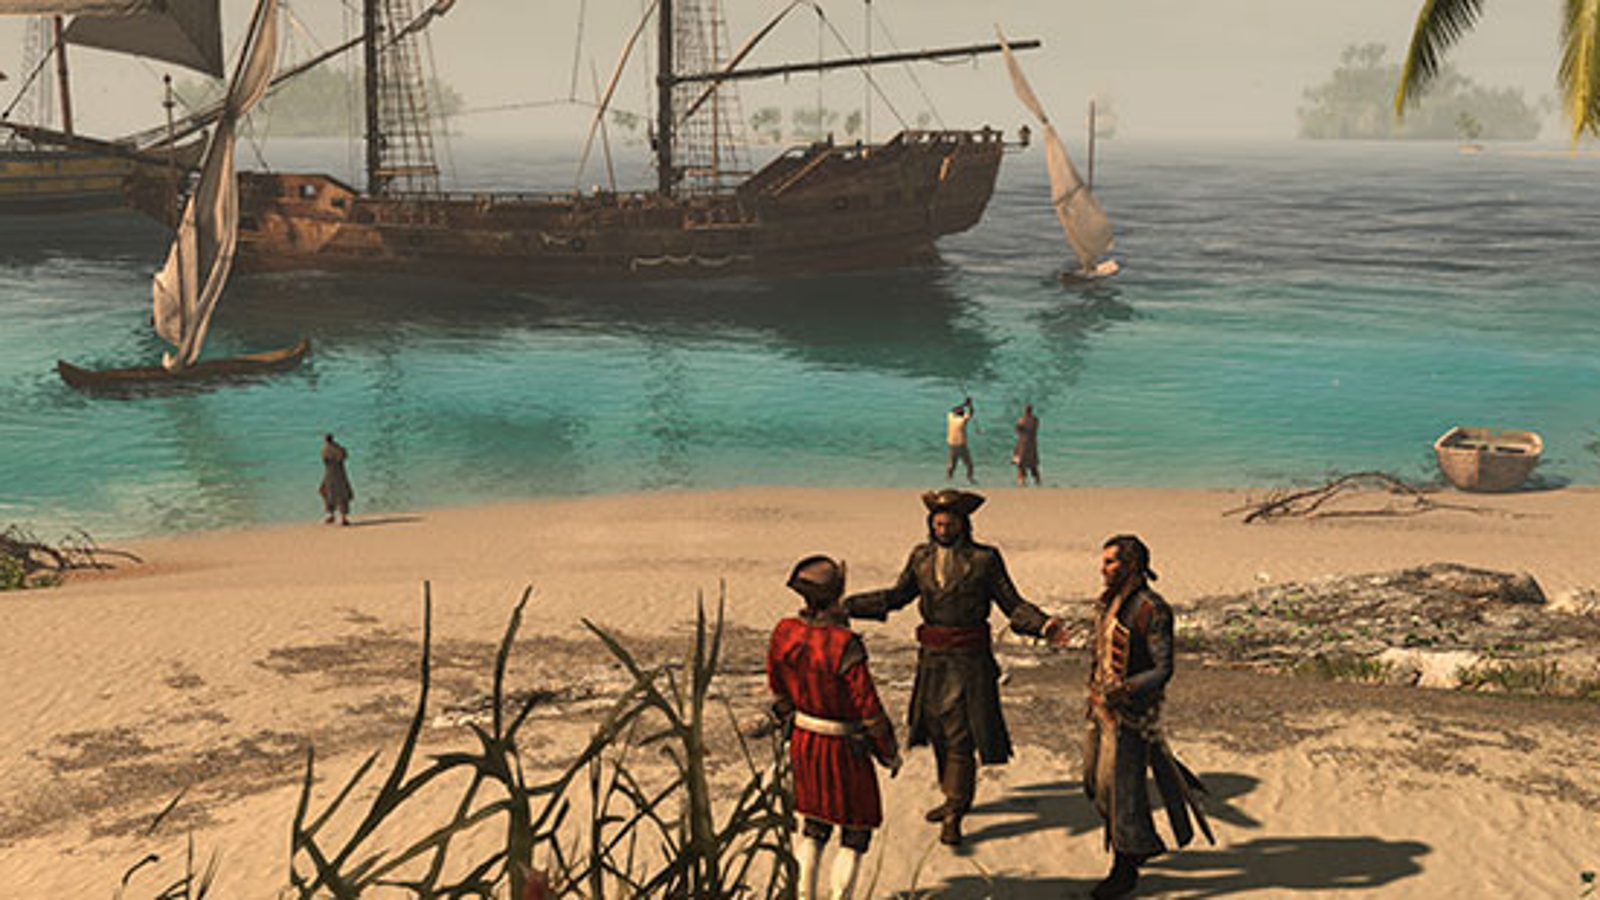 13 Minutes of Caribbean Open-World Gameplay  Assassin's Creed 4 Black Flag  [North America] 